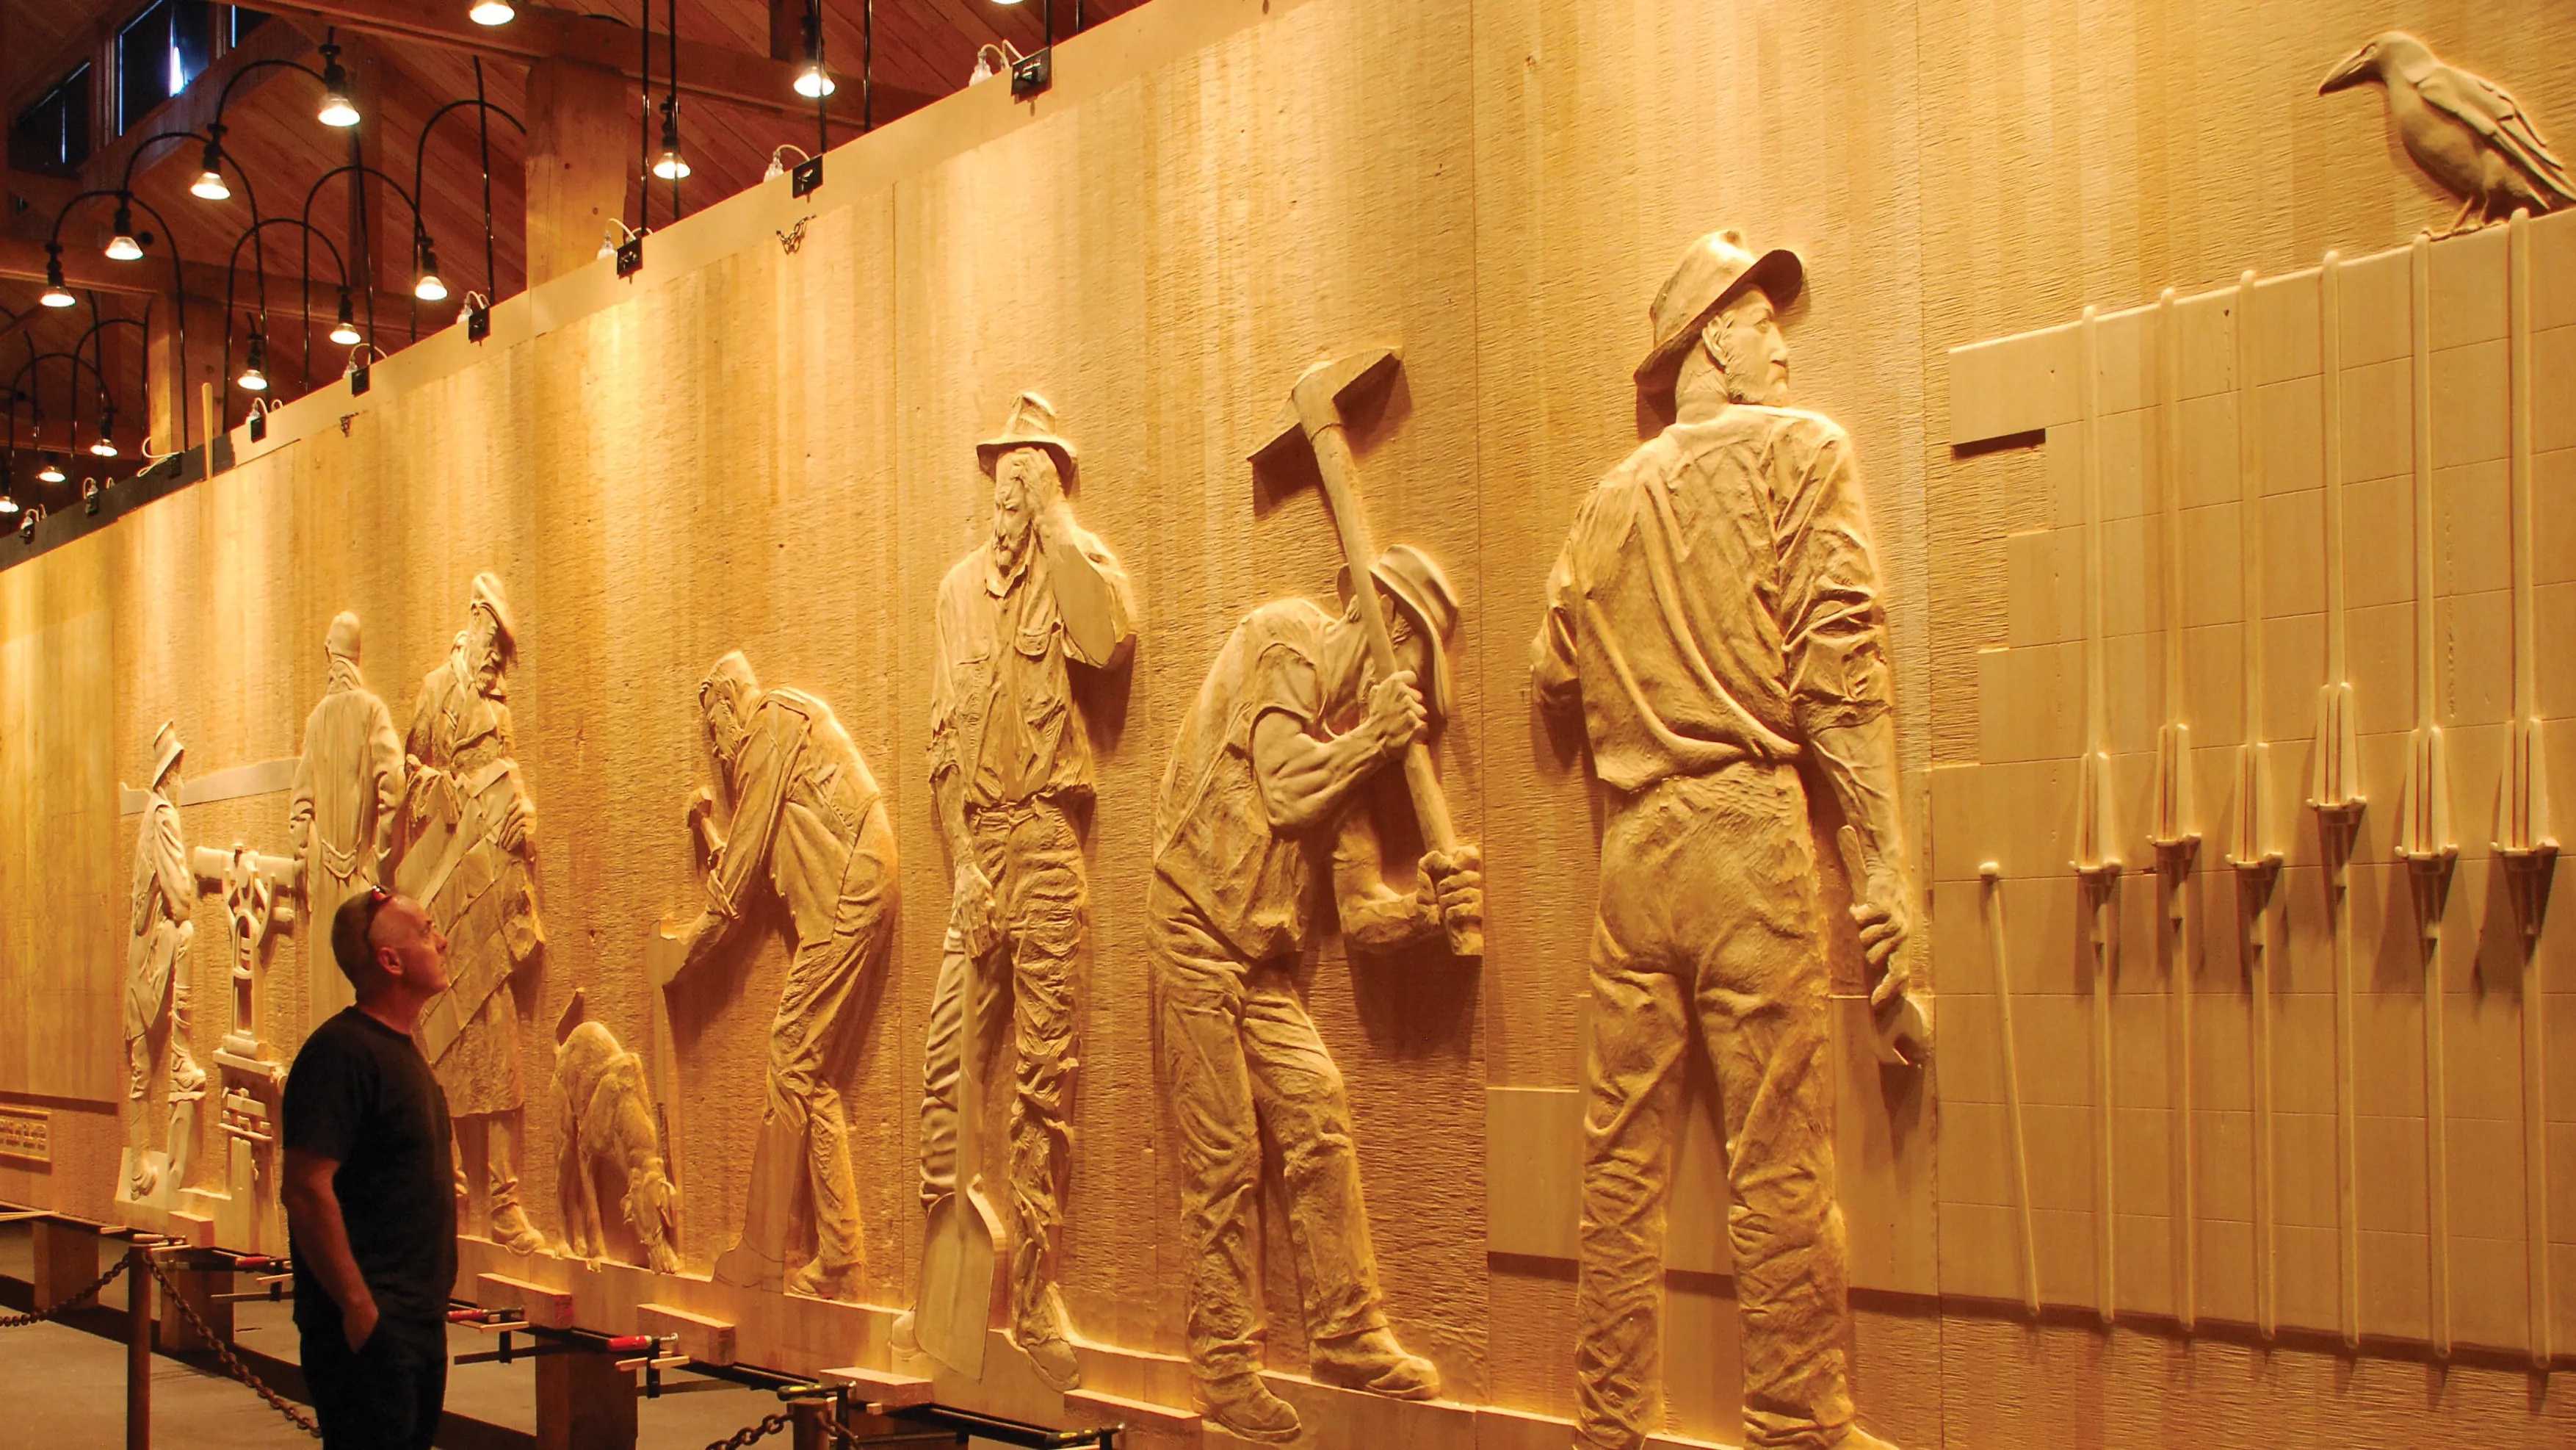 A traveller looks at The Wall in the Wilderness, a sculpture carved from wood panels. The panels tell the history of the Central Highlands region - with the indigenous people, the pioneering timber harvesters, pastoralists, miners and Hydro workers.